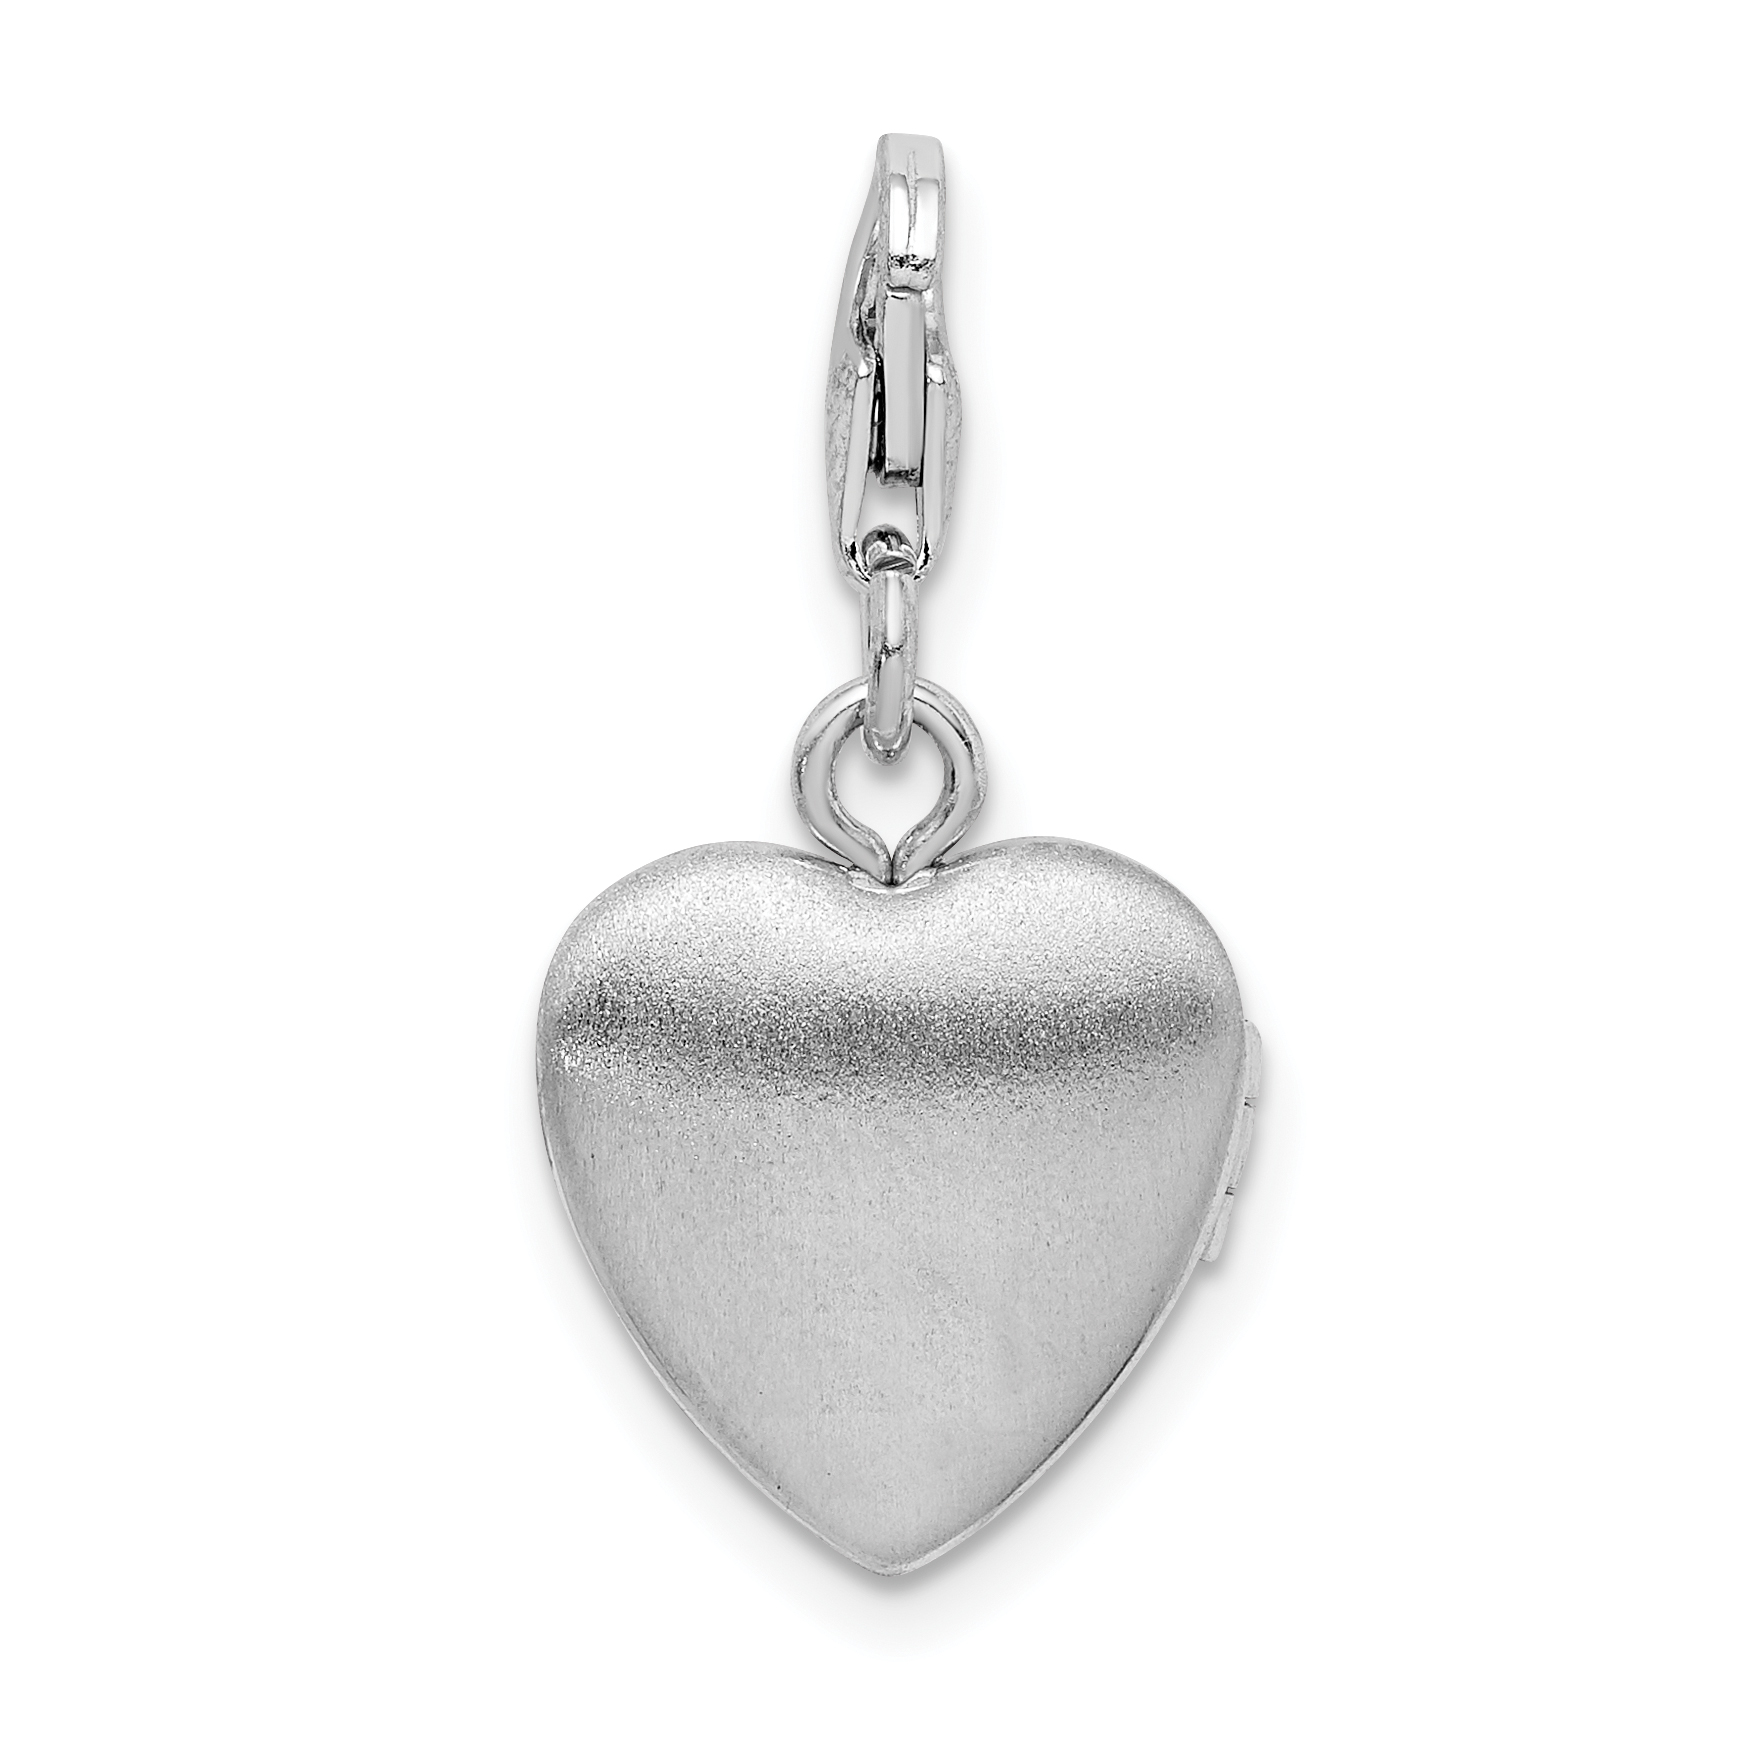 Sterling Silver 0.4IN Polished Lobster Clasp Heart Locket (0.5IN x 0.4IN ) - image 3 of 5